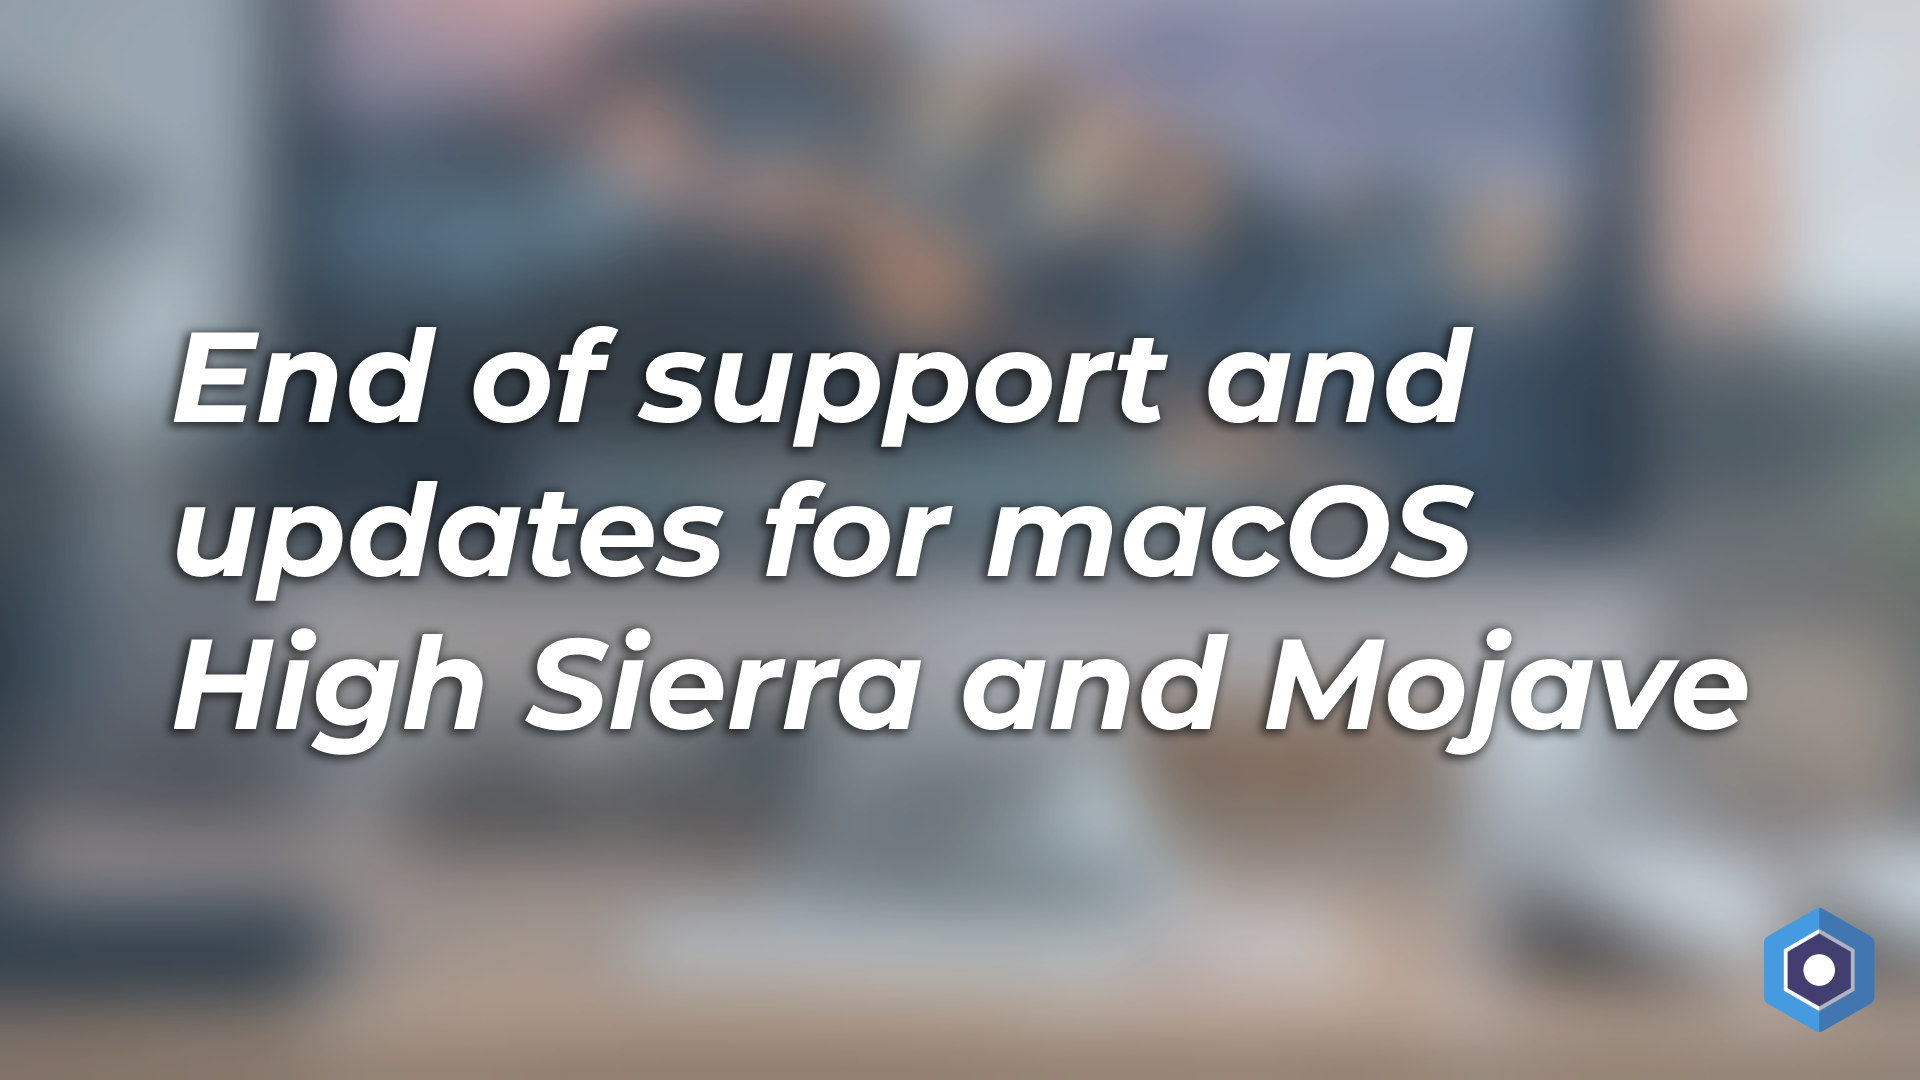 End of support and updates for macOS High Sierra and Mojave